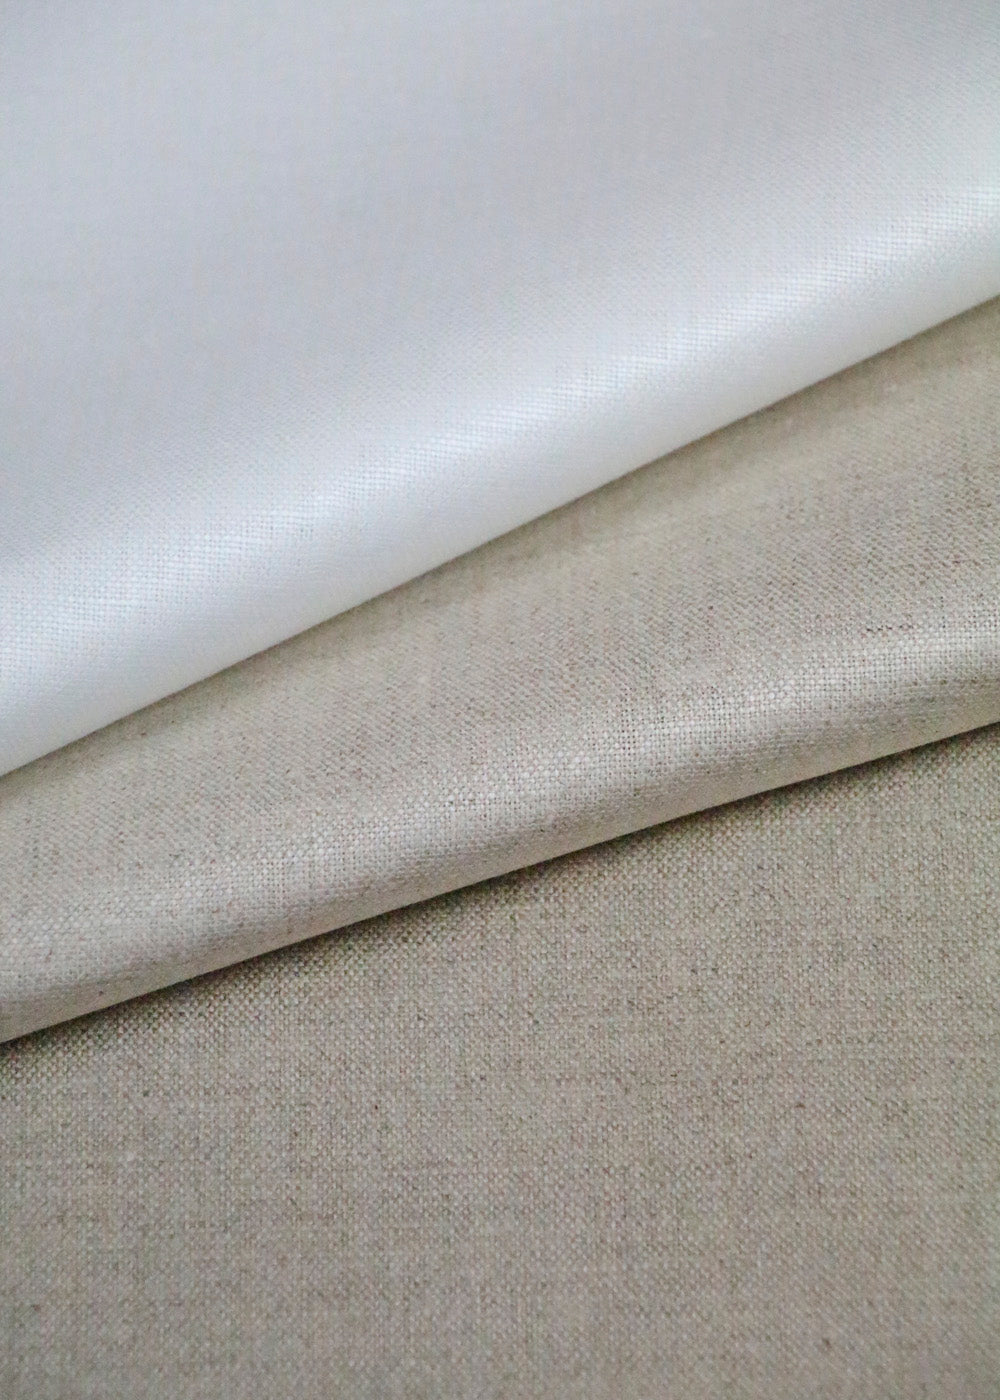 stack of linen fabrics with a luminous glazed finish, shown in three different colors